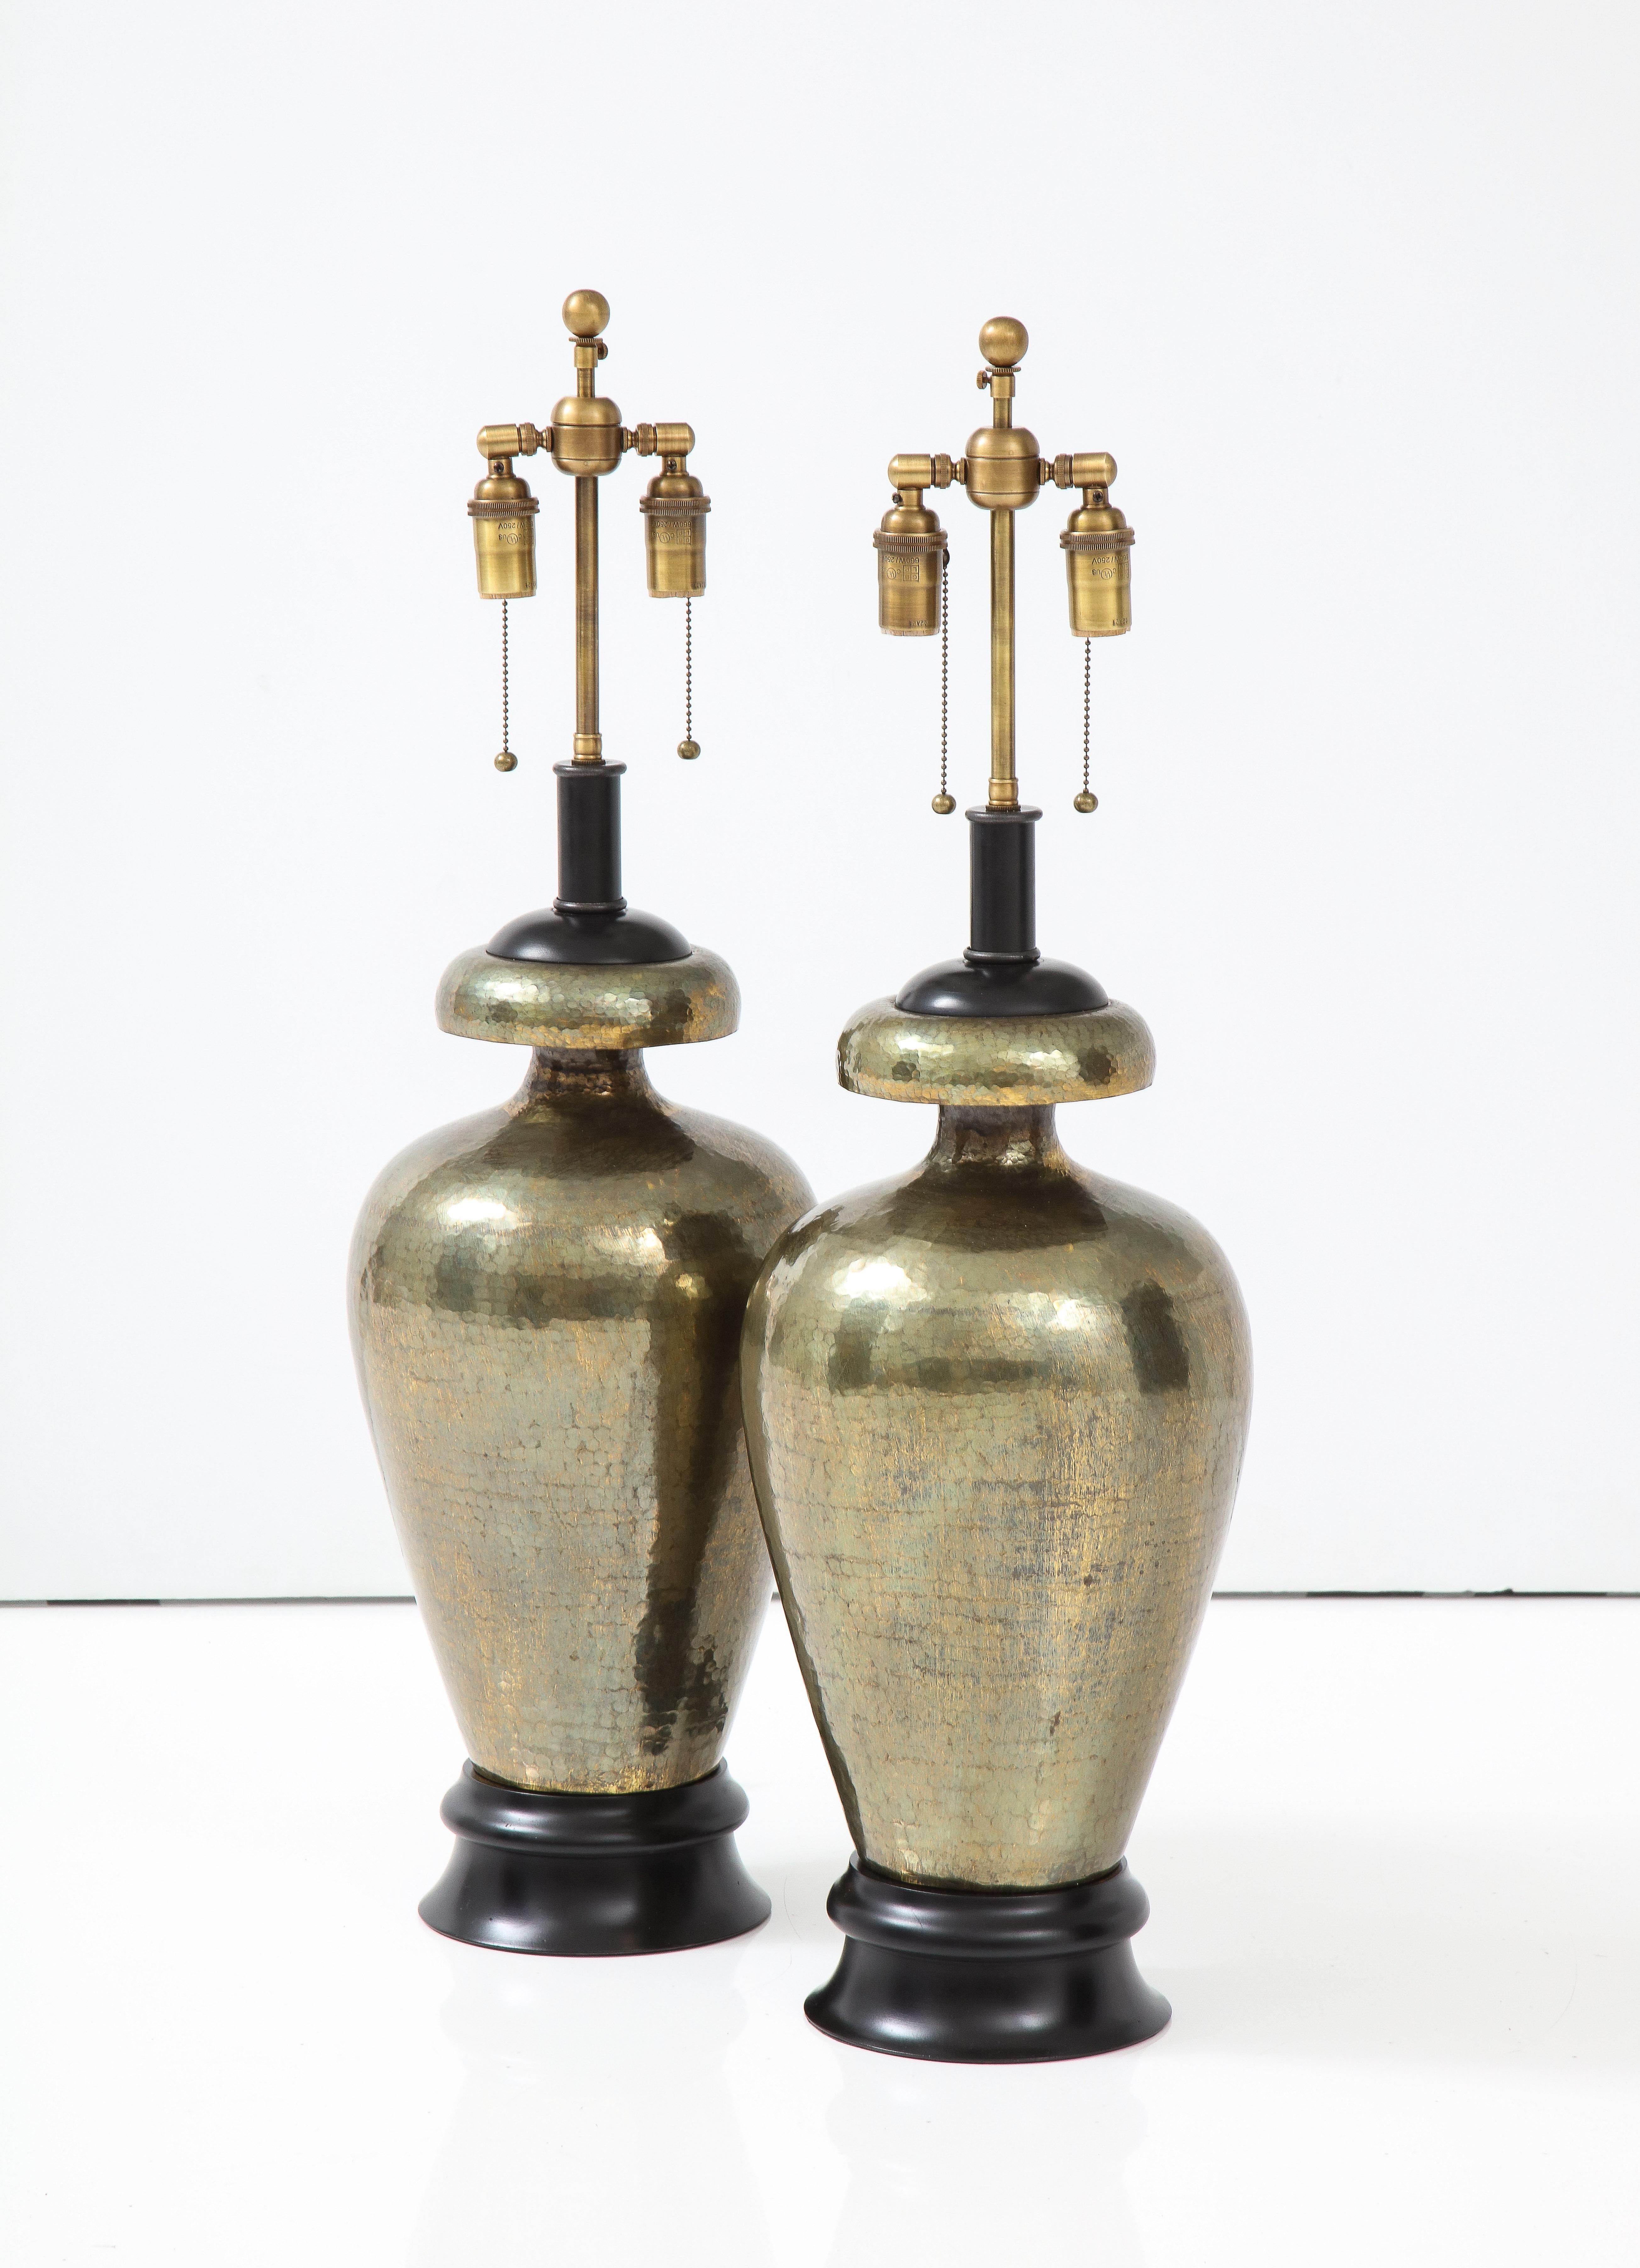 Pair of 1960's large Hammered brass lamps.
The hammered brass lamps have a wonderful patina and they have been
Newly rewired with adjustable Antique brass double clusters that take standard size bulbs.
The height to the top of the brass lamp is 21